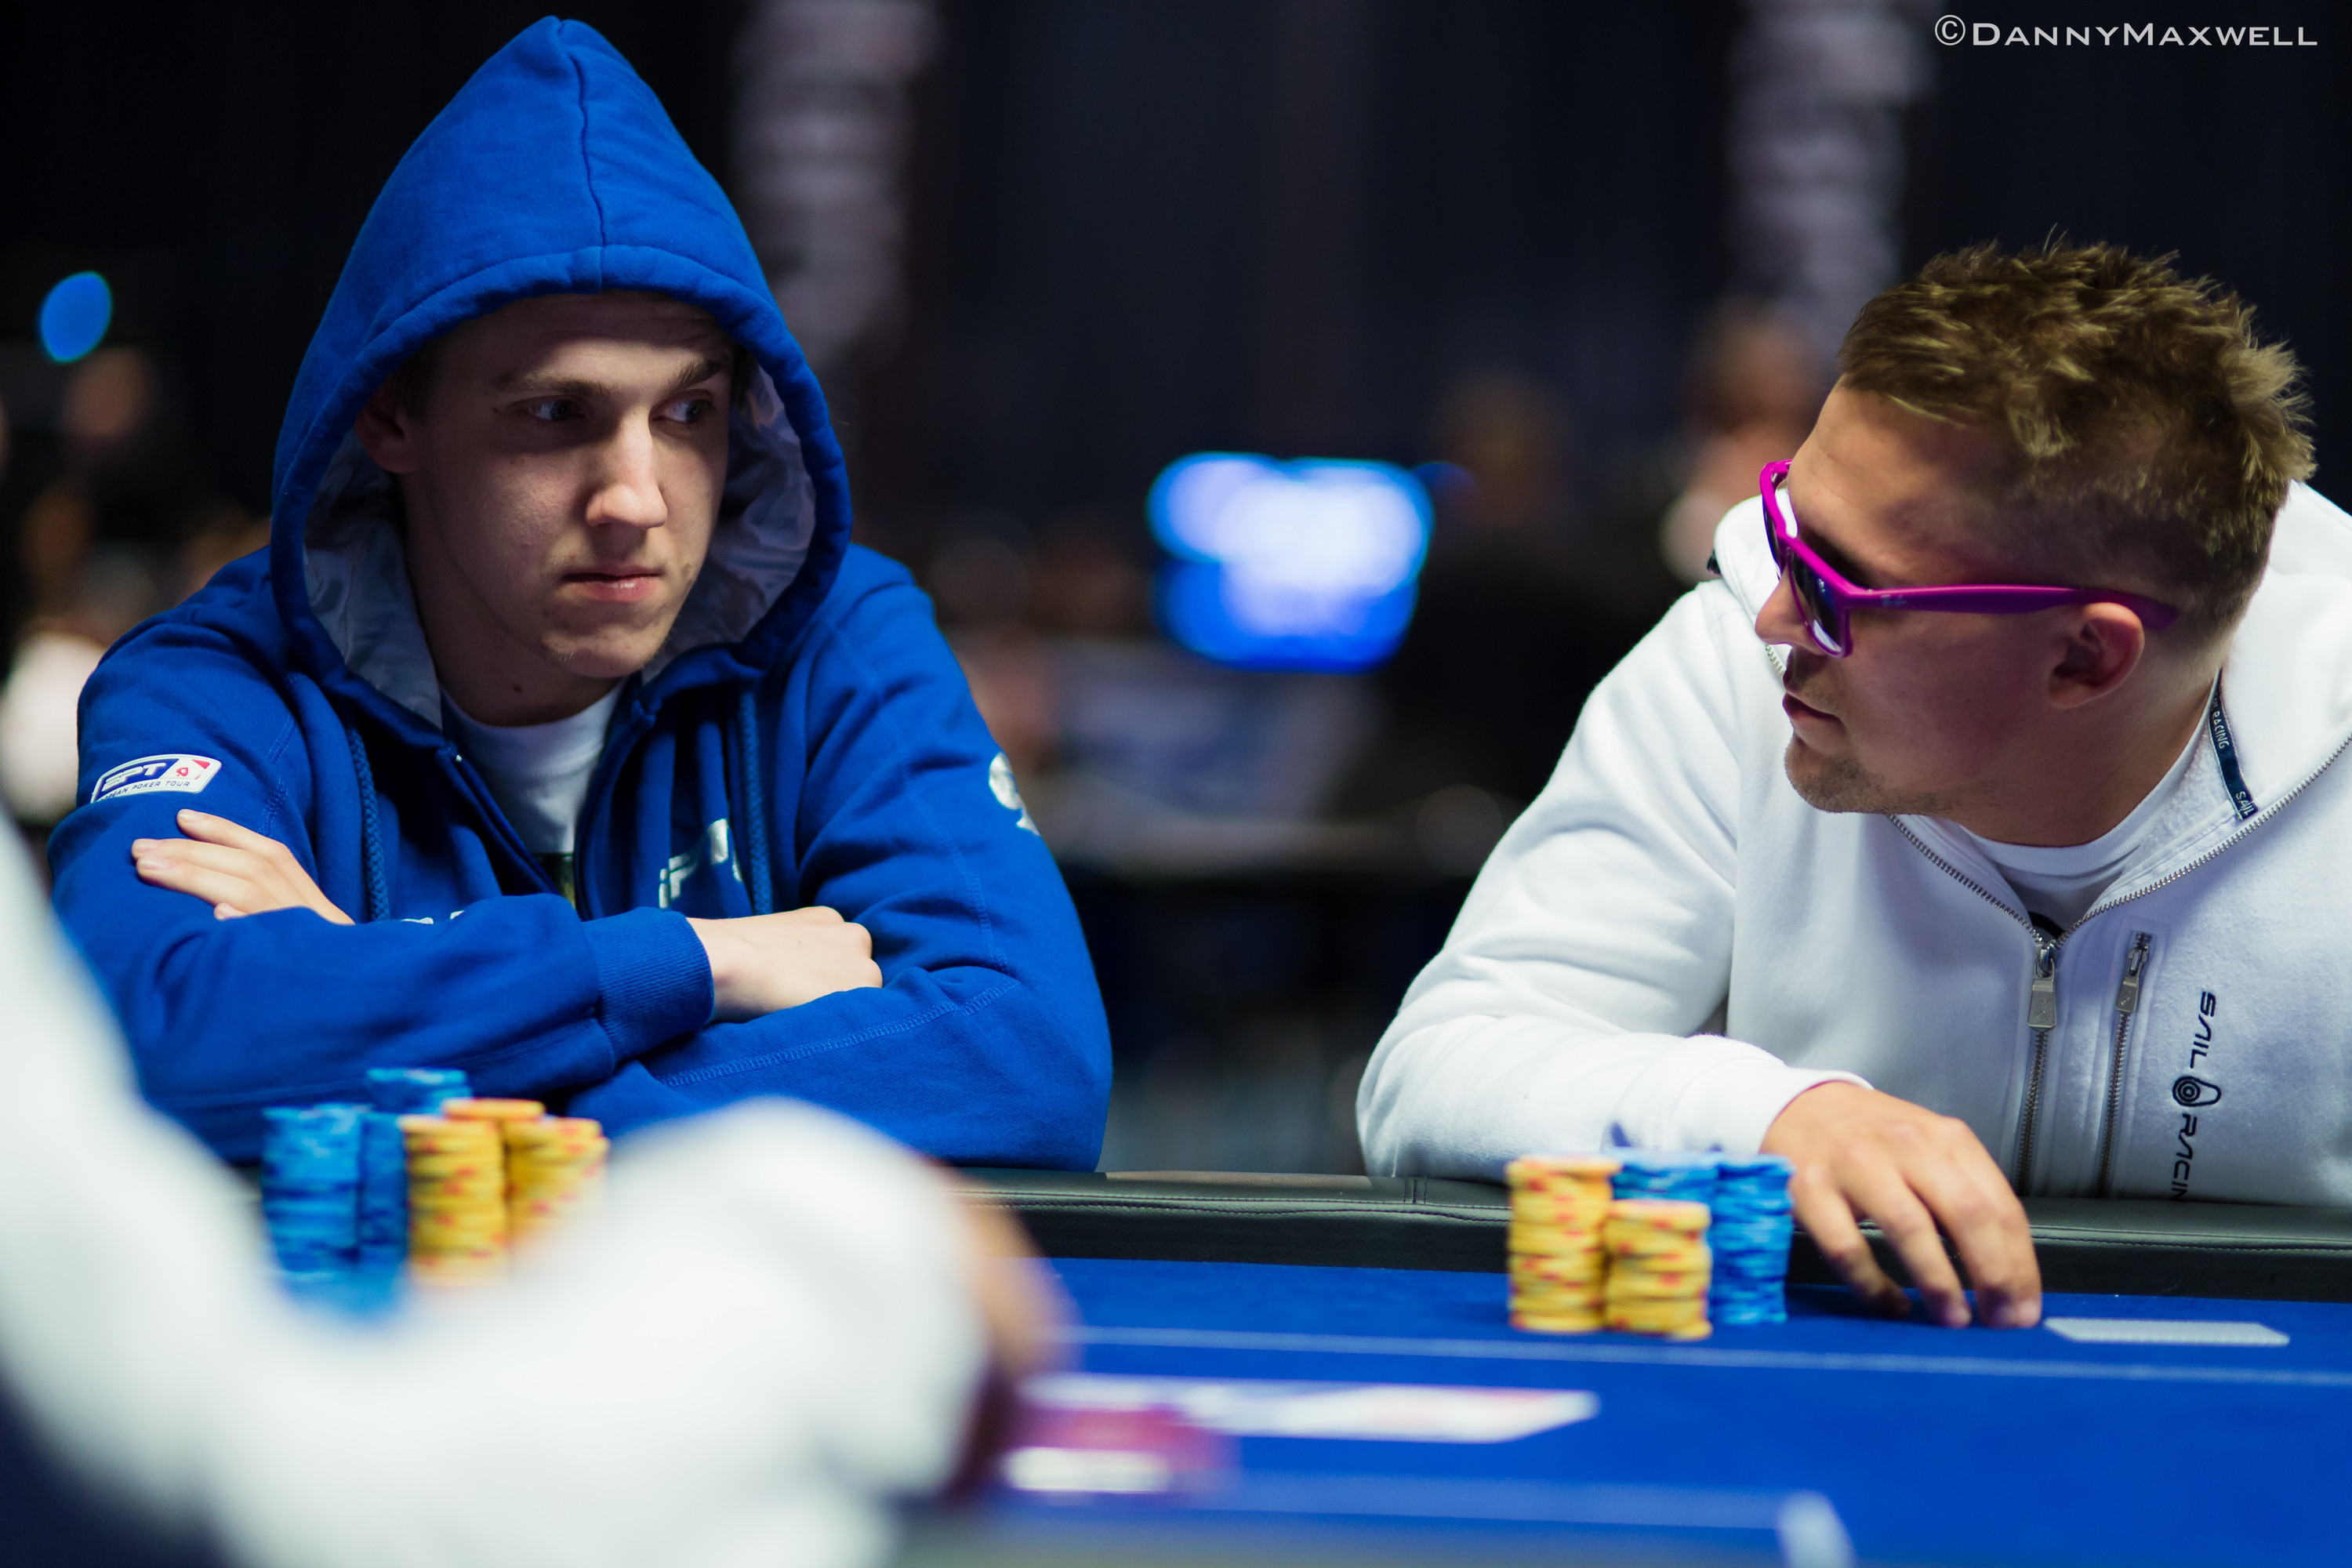 What is a poker face and why is it important?